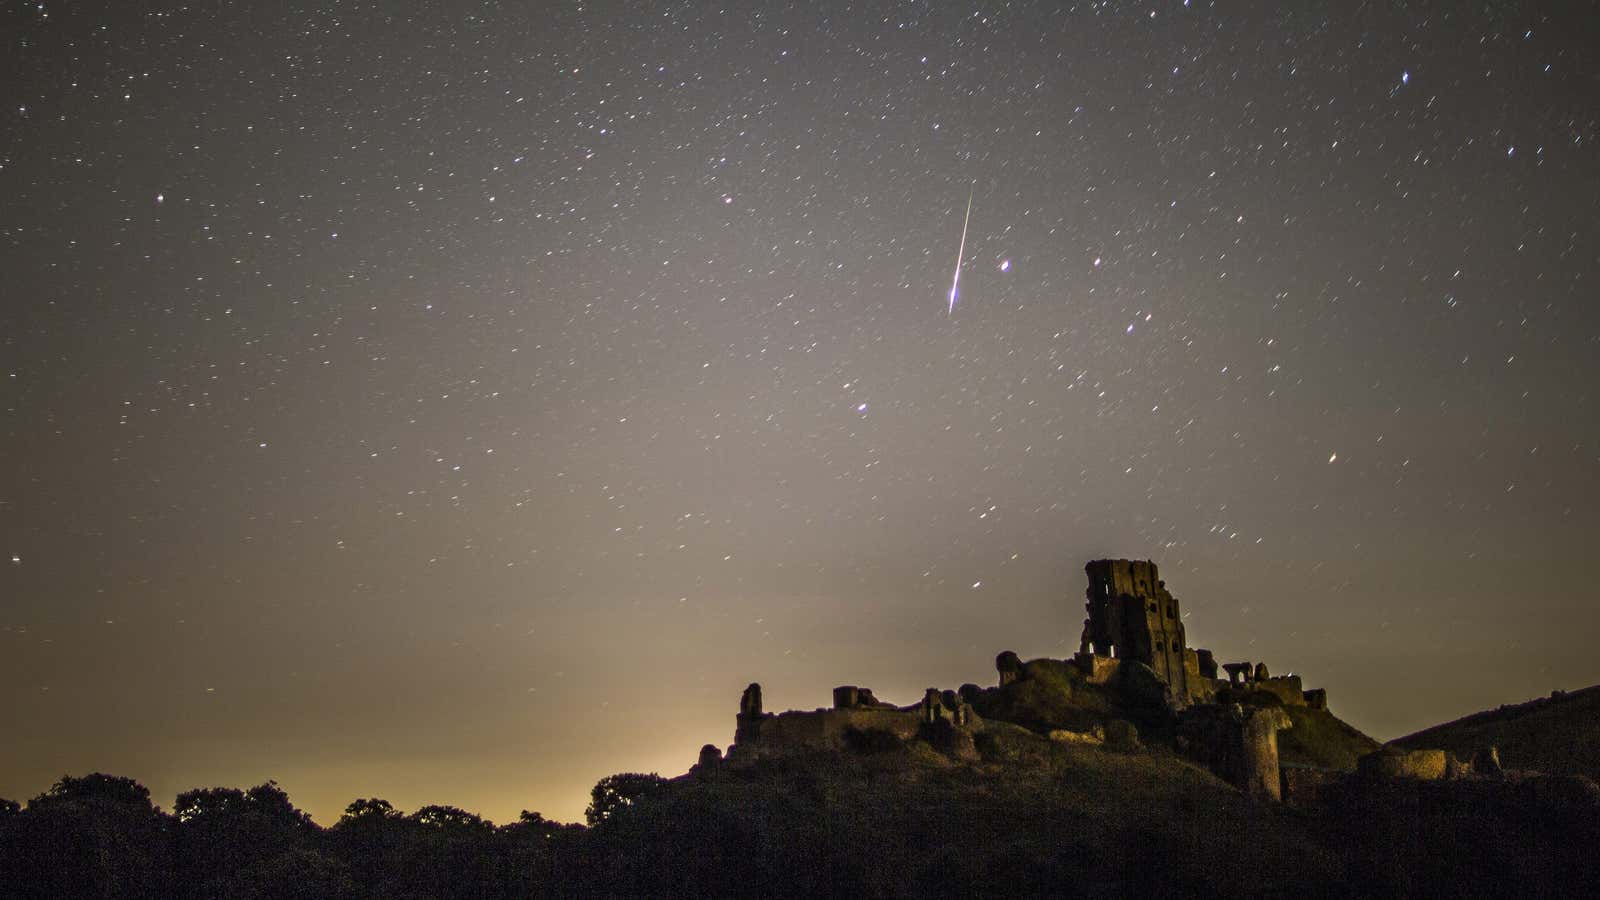 A meteor flashes across the night sky on Aug. 12, Corfe Castle, UK.